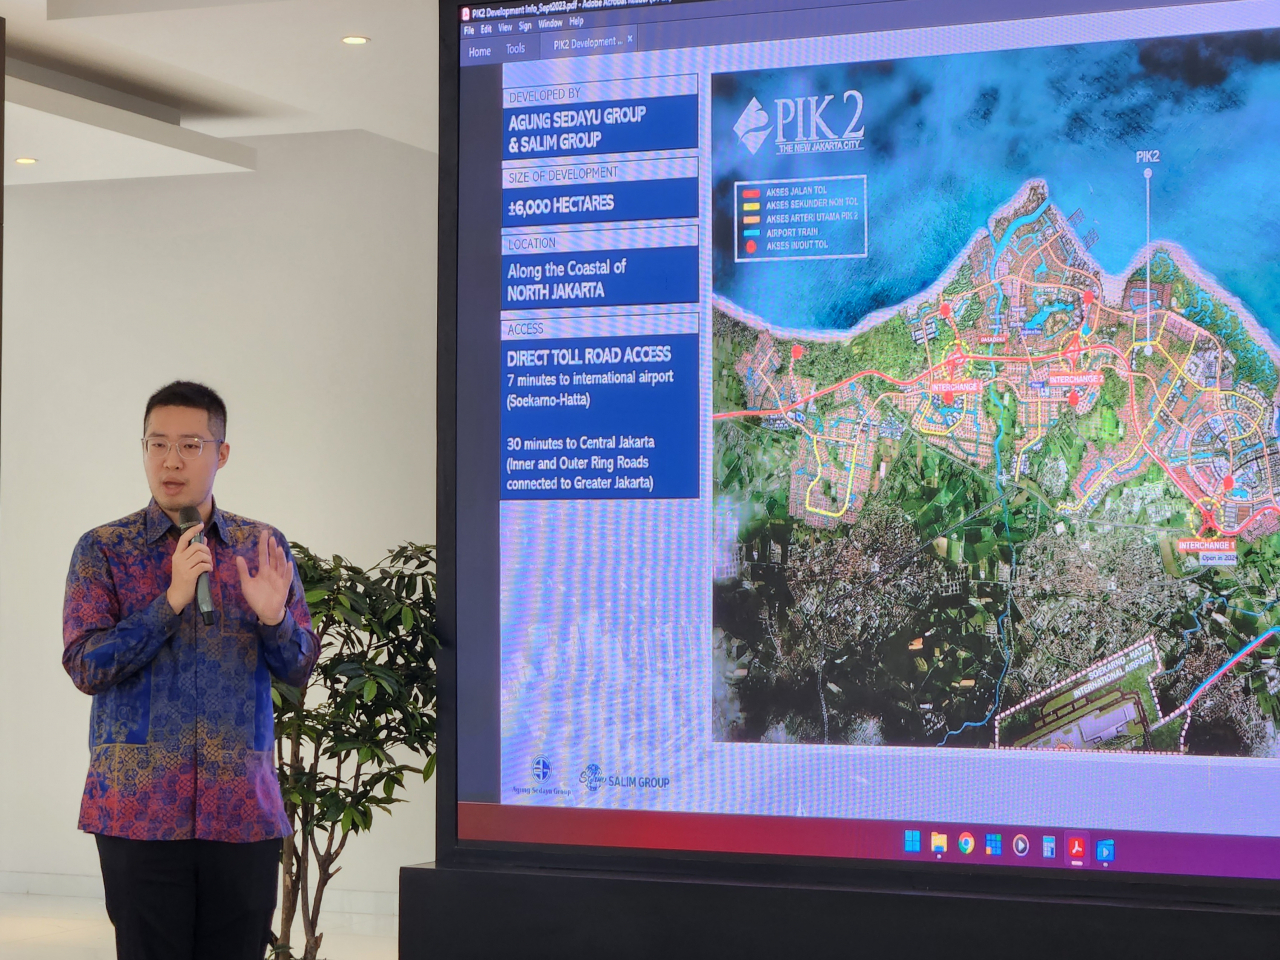 Steven Kusumo, CEO of Agung Sedayu Group, delivers a presentation on the Pantai Indah Kapuk 2 development project, at the Marketing Gallery Sedayu Indo City in Jakarta, Indonesia, Friday. (Song Seung-hyun/The Korea Herald)